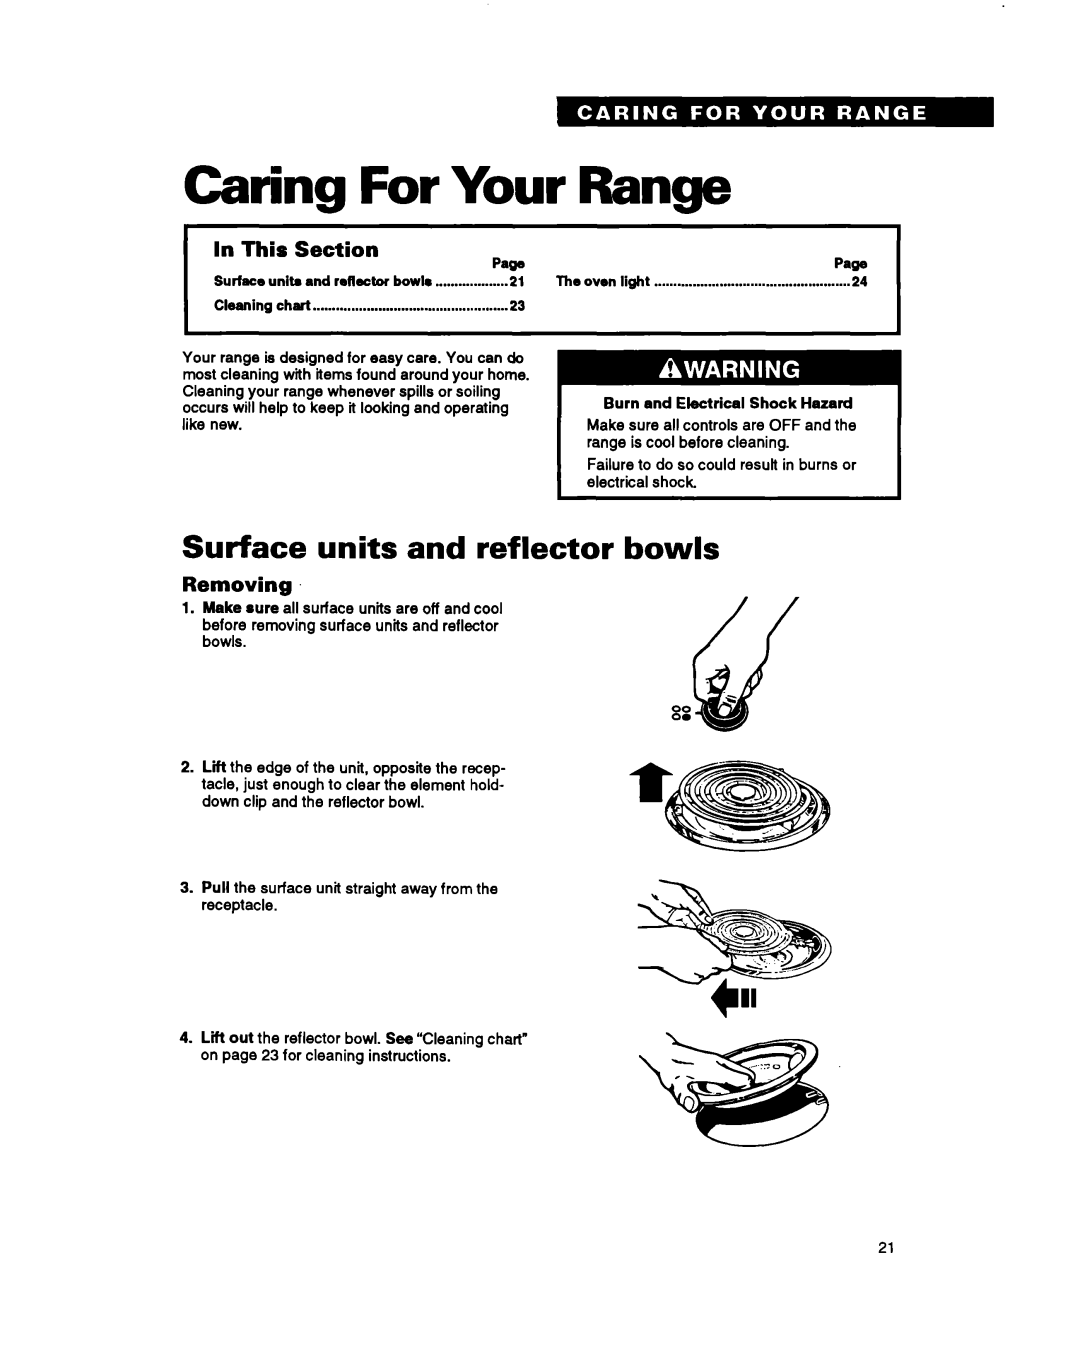 Whirlpool RS660BXB Caring For Your Range, Surface units and reflector bowls, In This Section Paw, Page, Removing 